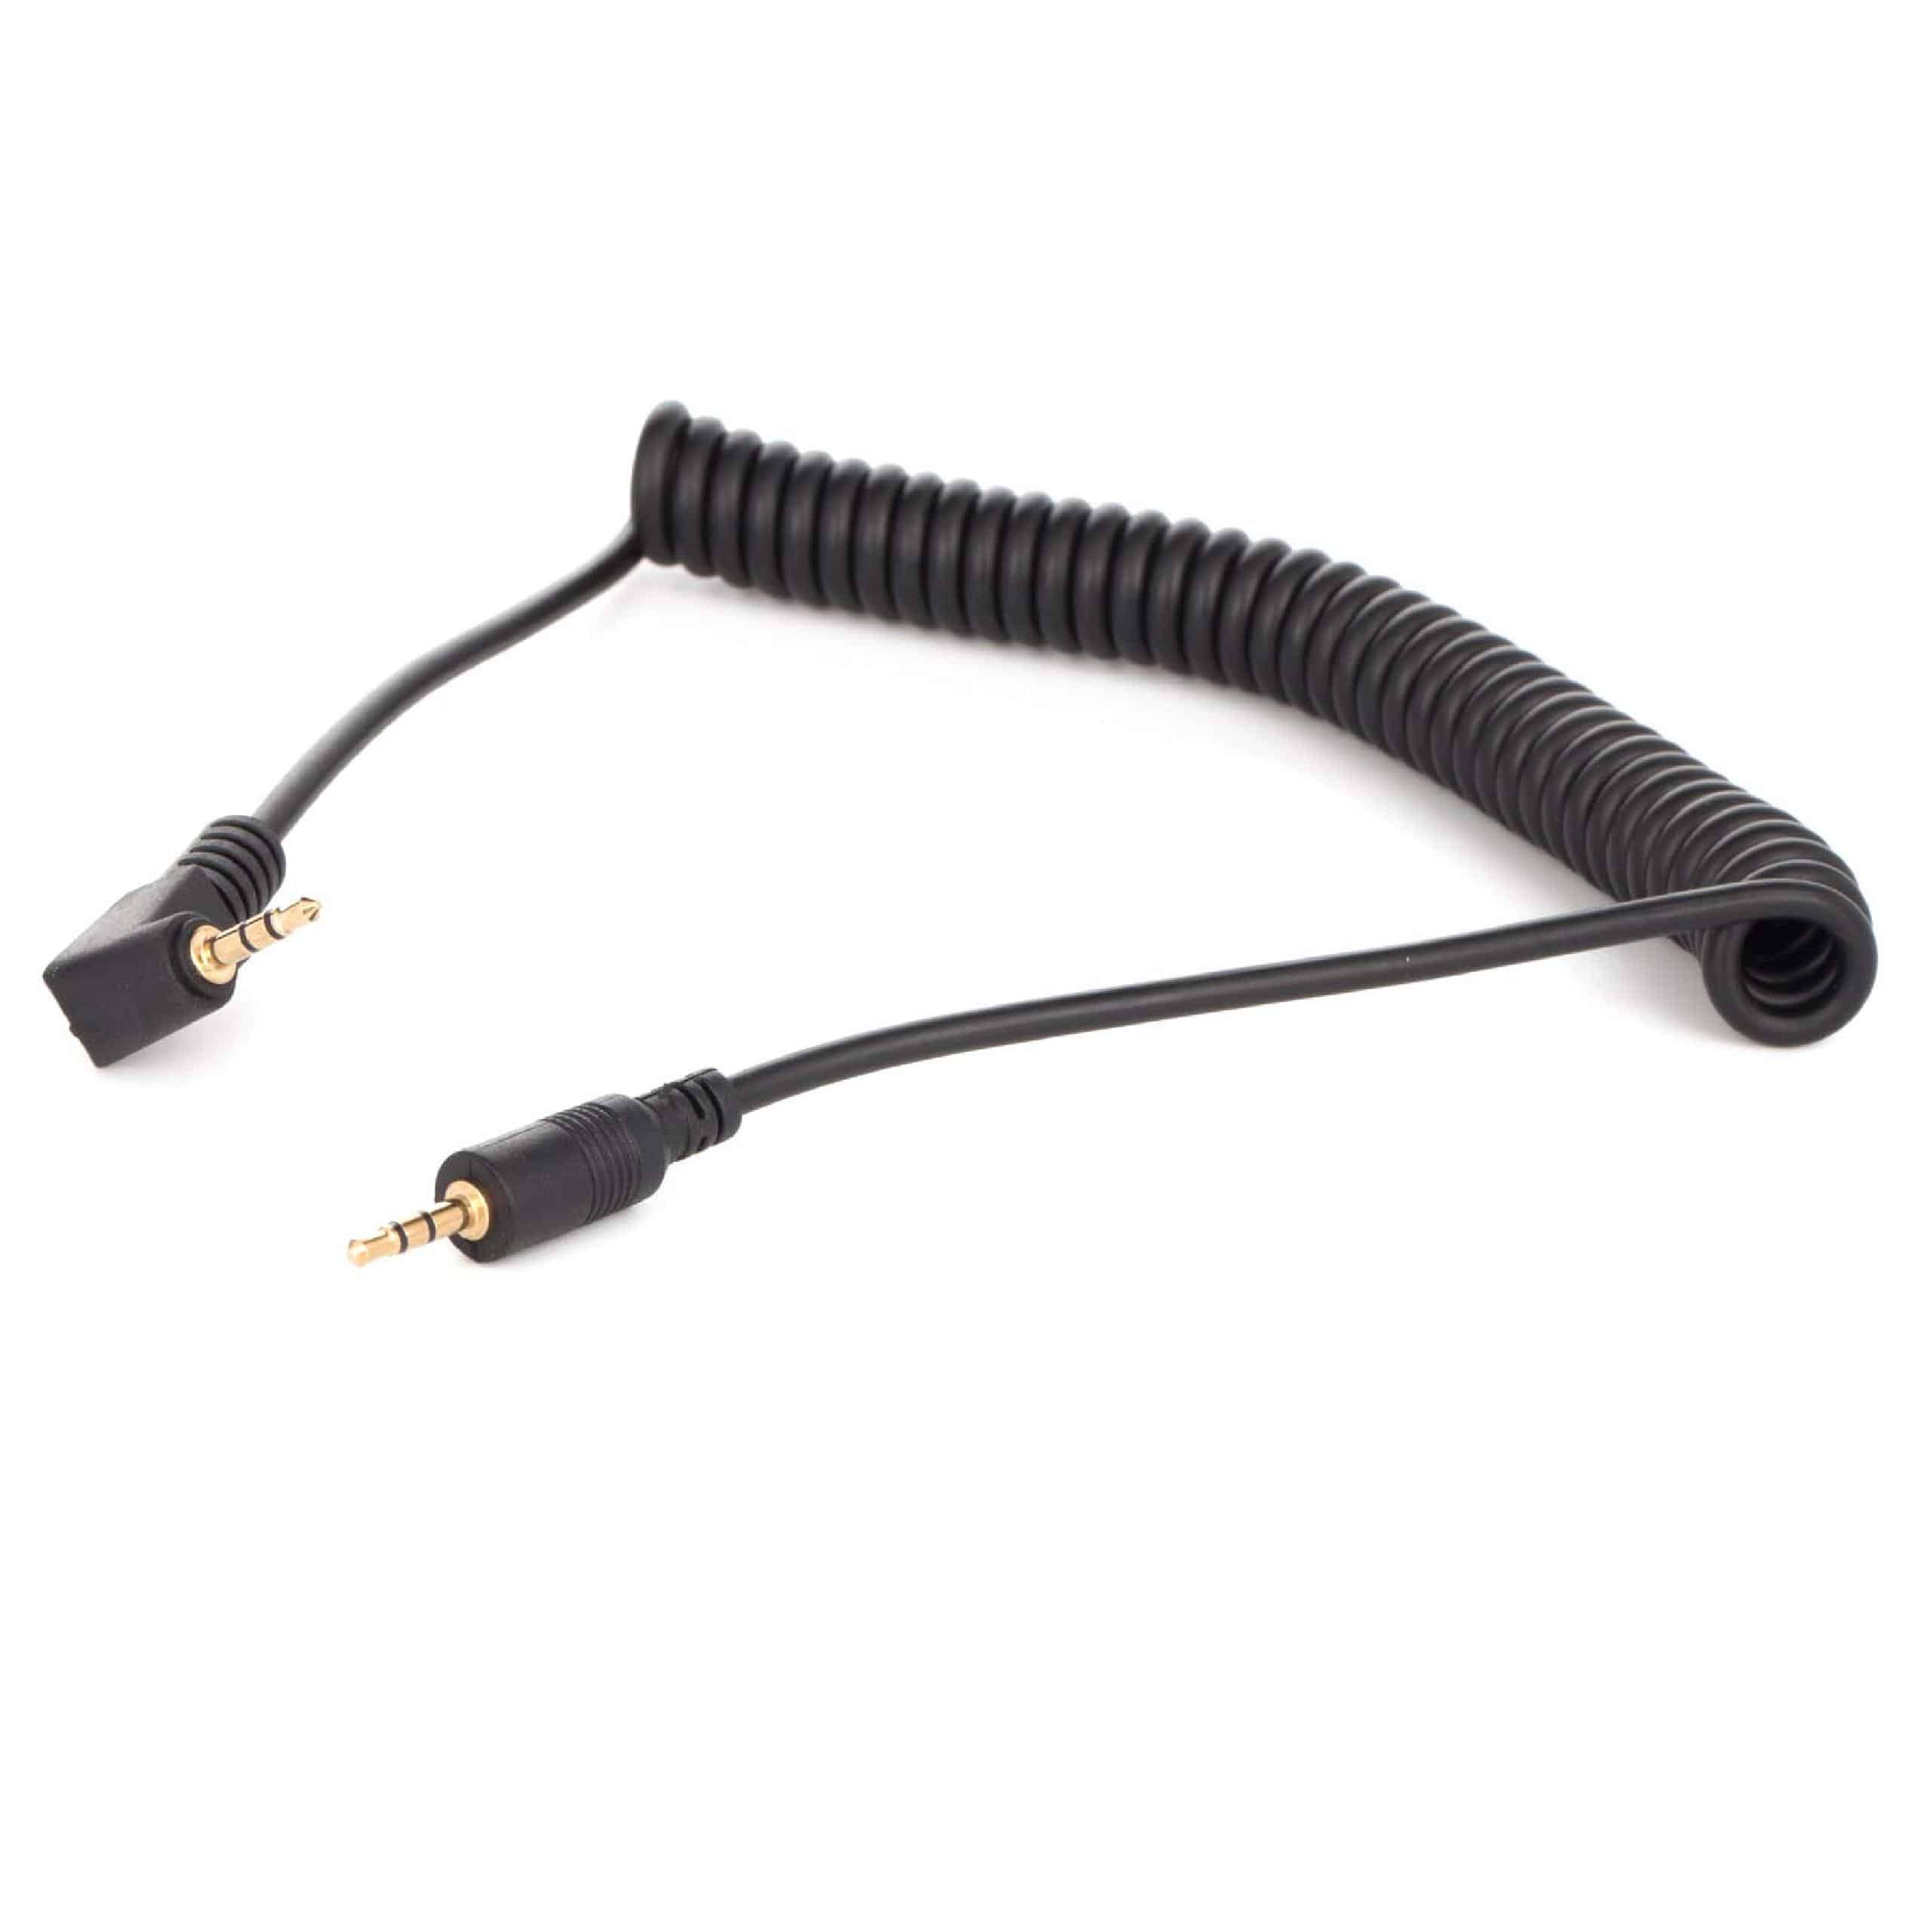 Cable for Shutter Release suitable for IST DL Pentax Camera etc. - 120 cm